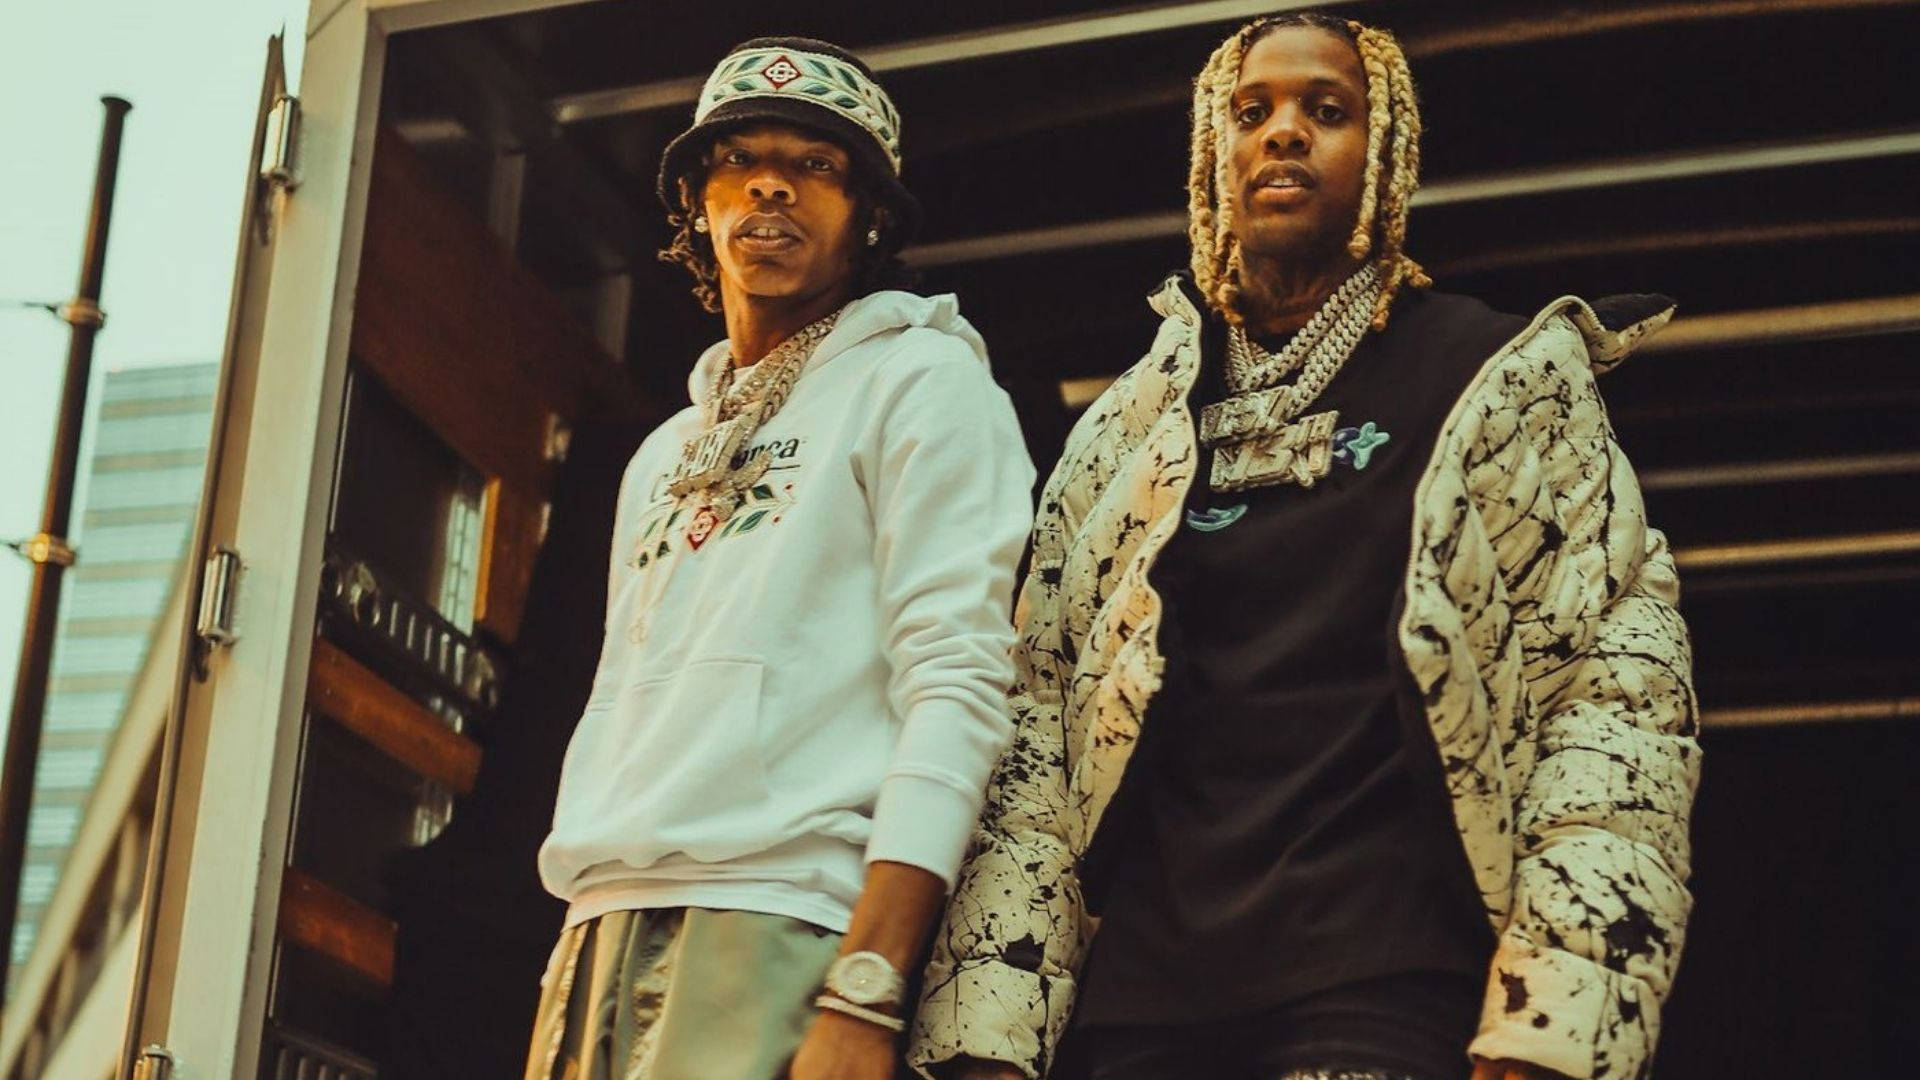 Lil Durk And Lil Baby Outside Wallpaper